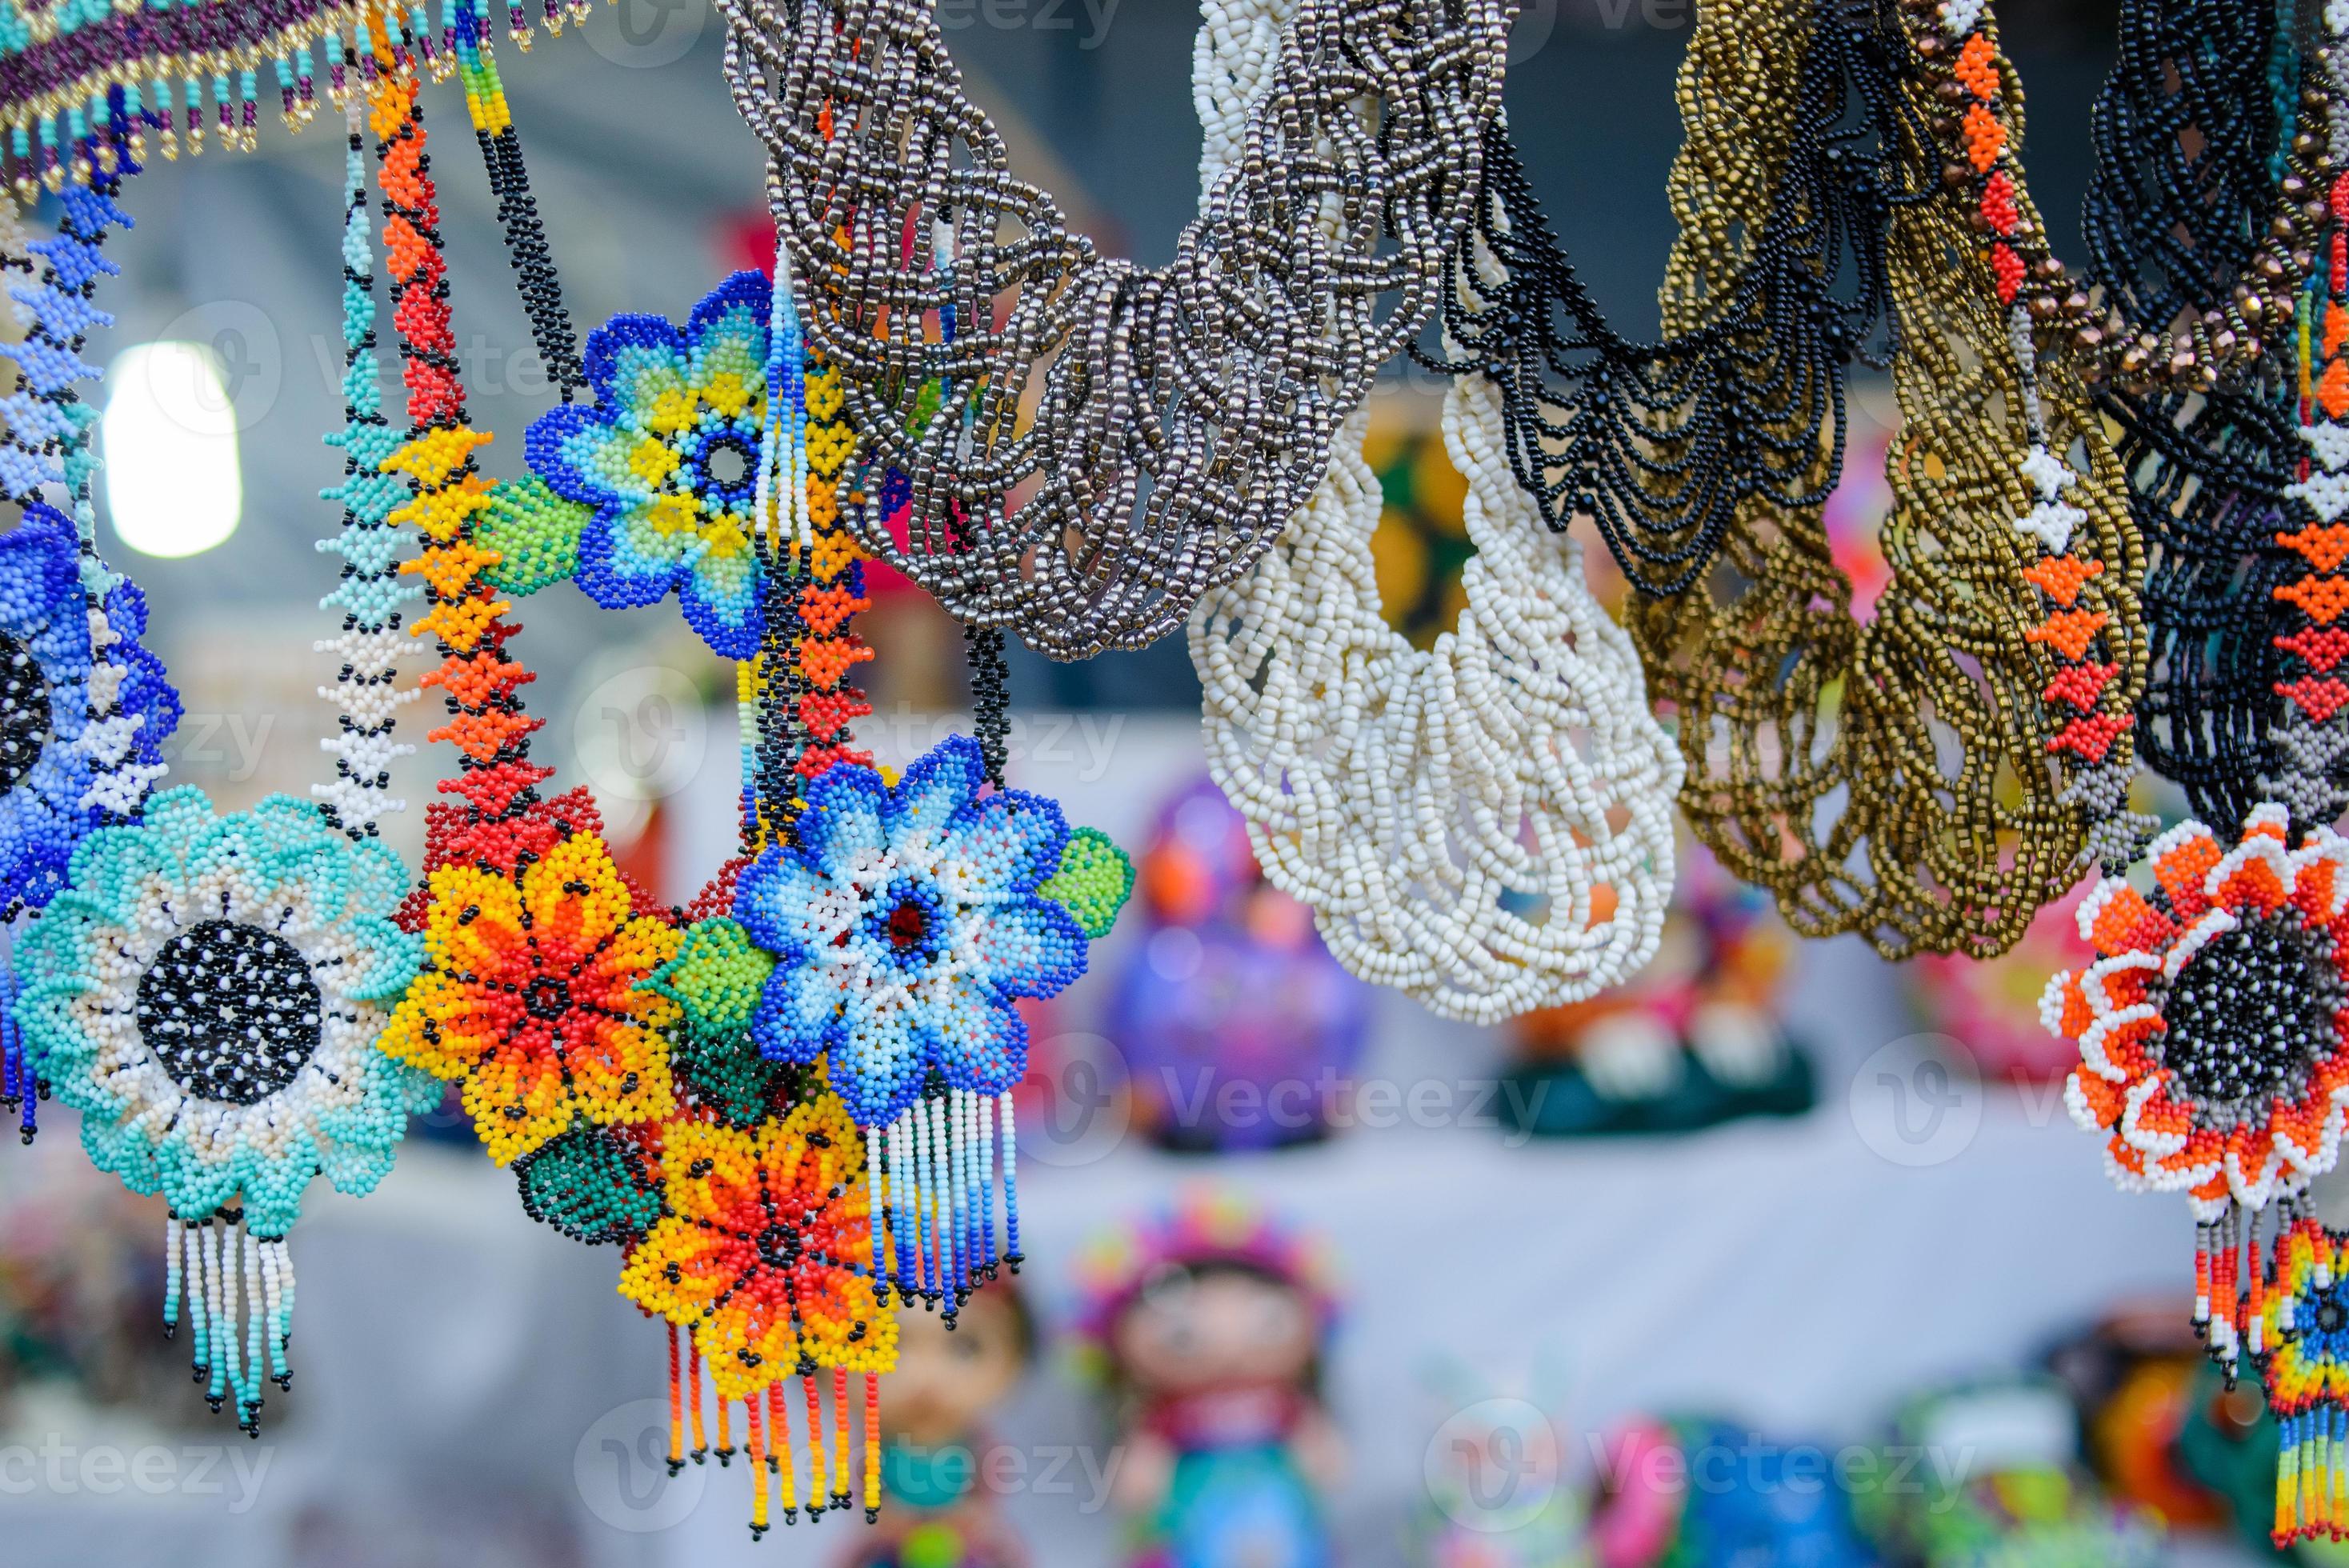 Accessories made with multicolored chaquira. handicrafts made with colorful stones. 14441953 Stock Photo at Vecteezy